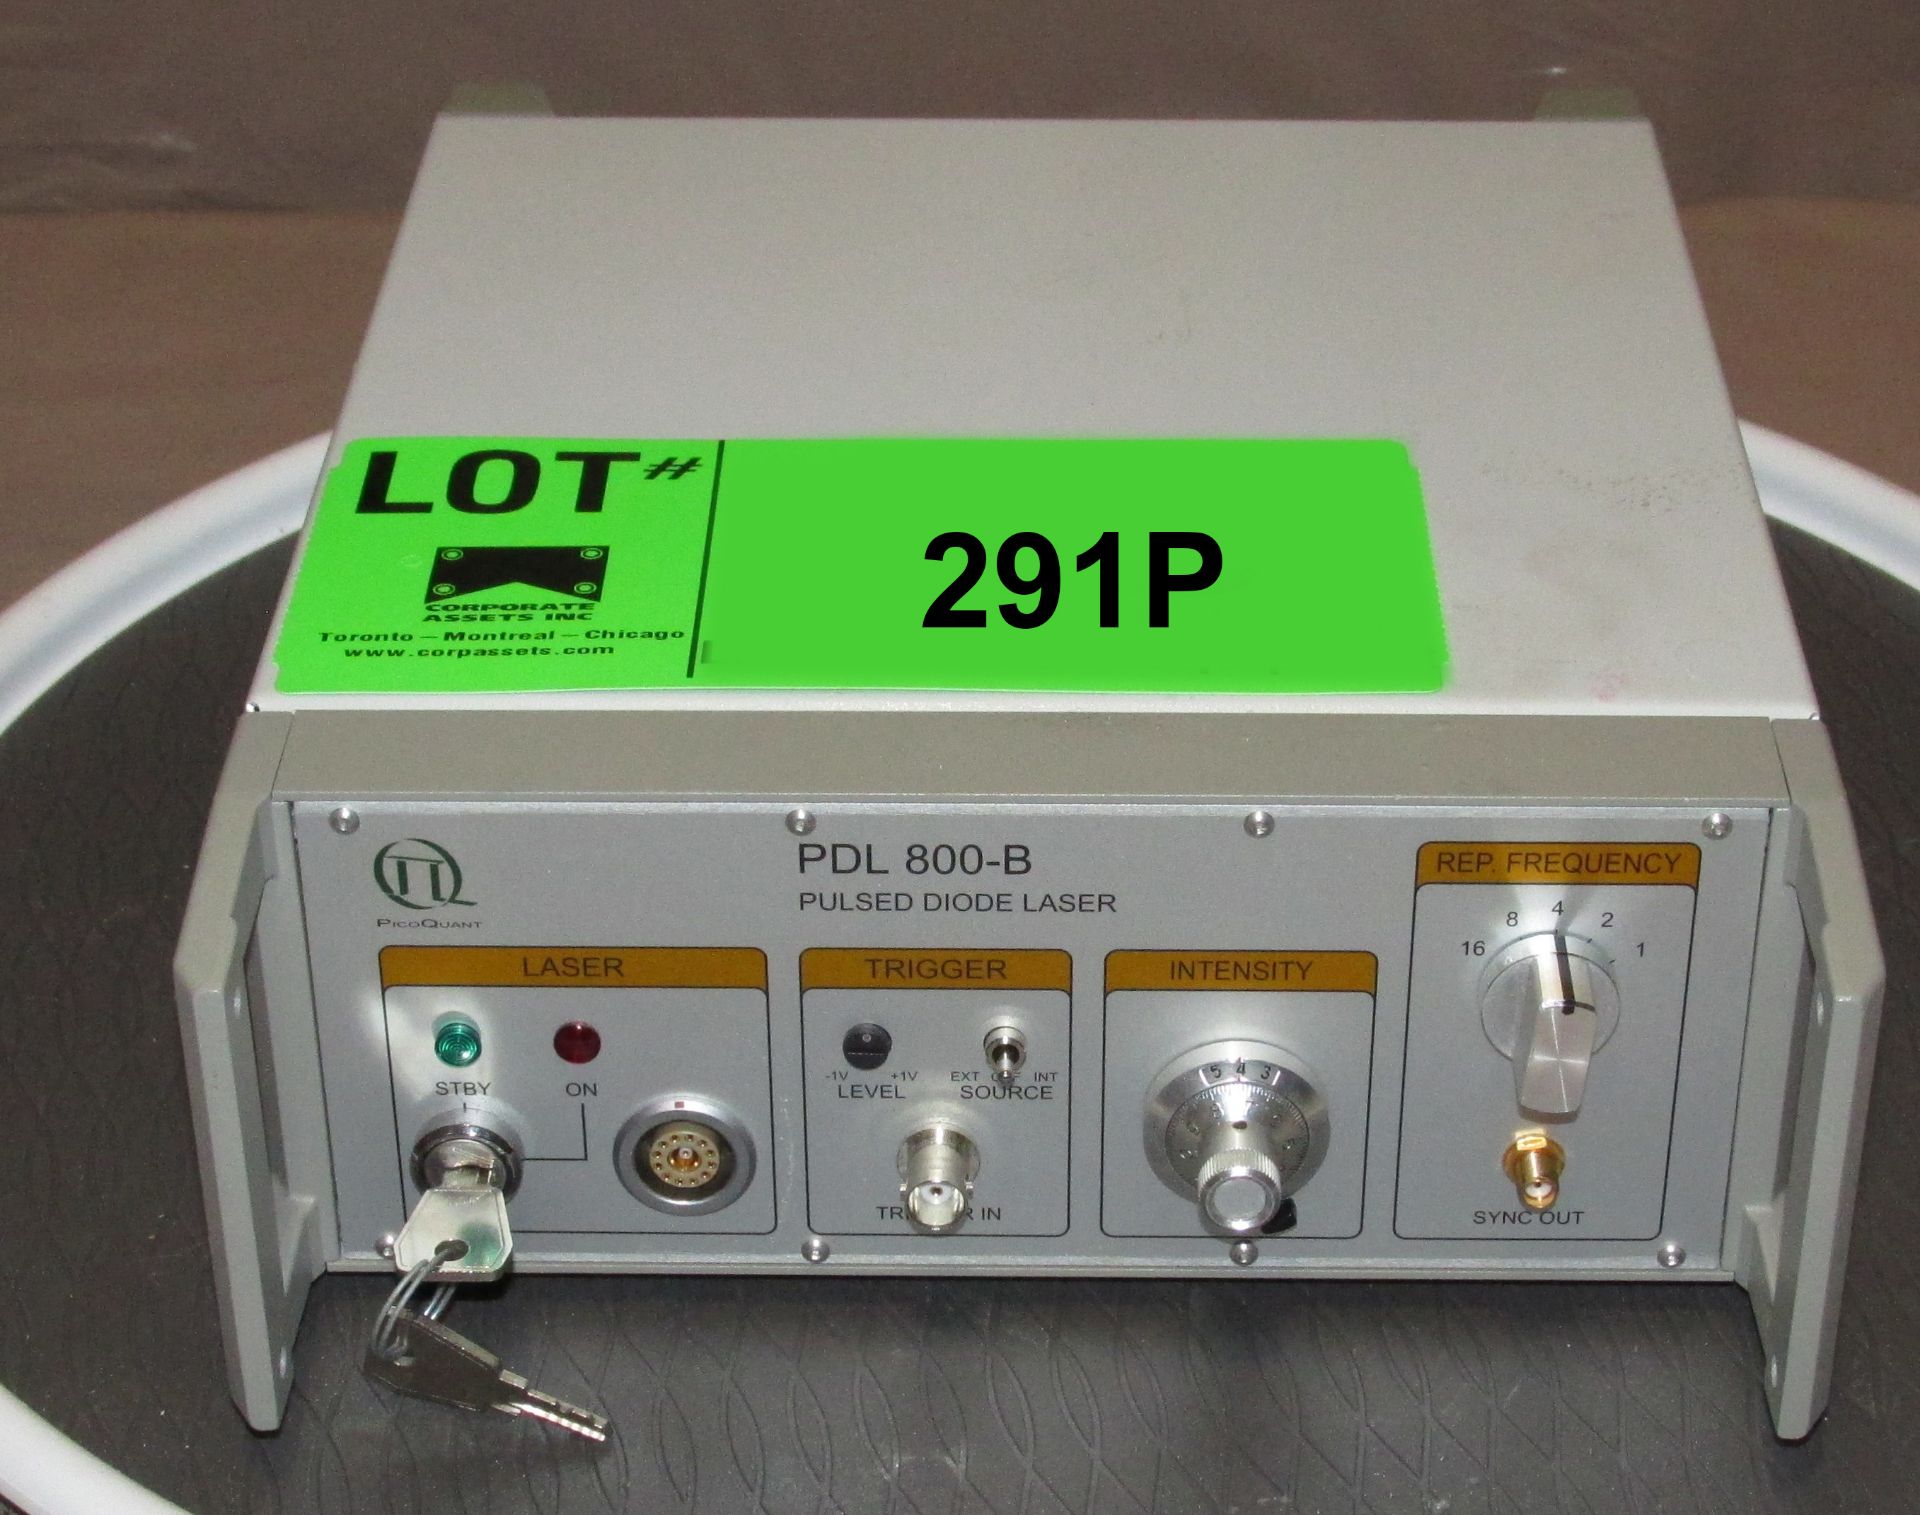 PICO-QUANT PDL-800-B PULSE DIODE LASER S/N: P-30-1-80-29255/03 (LOCATED IN TORONTO, ON)